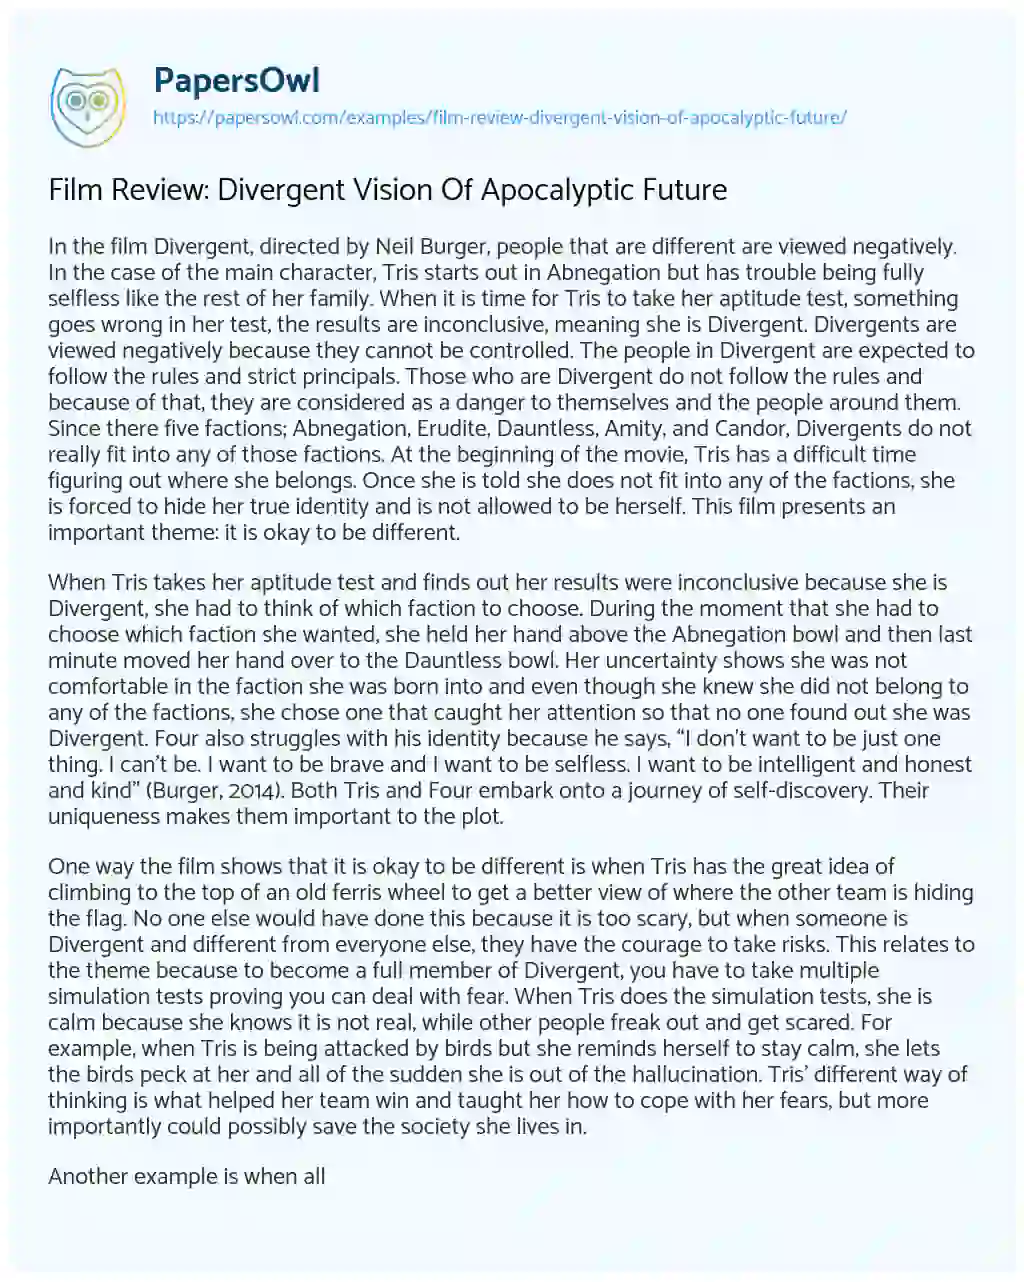 Essay on Film Review: Divergent Vision of Apocalyptic Future